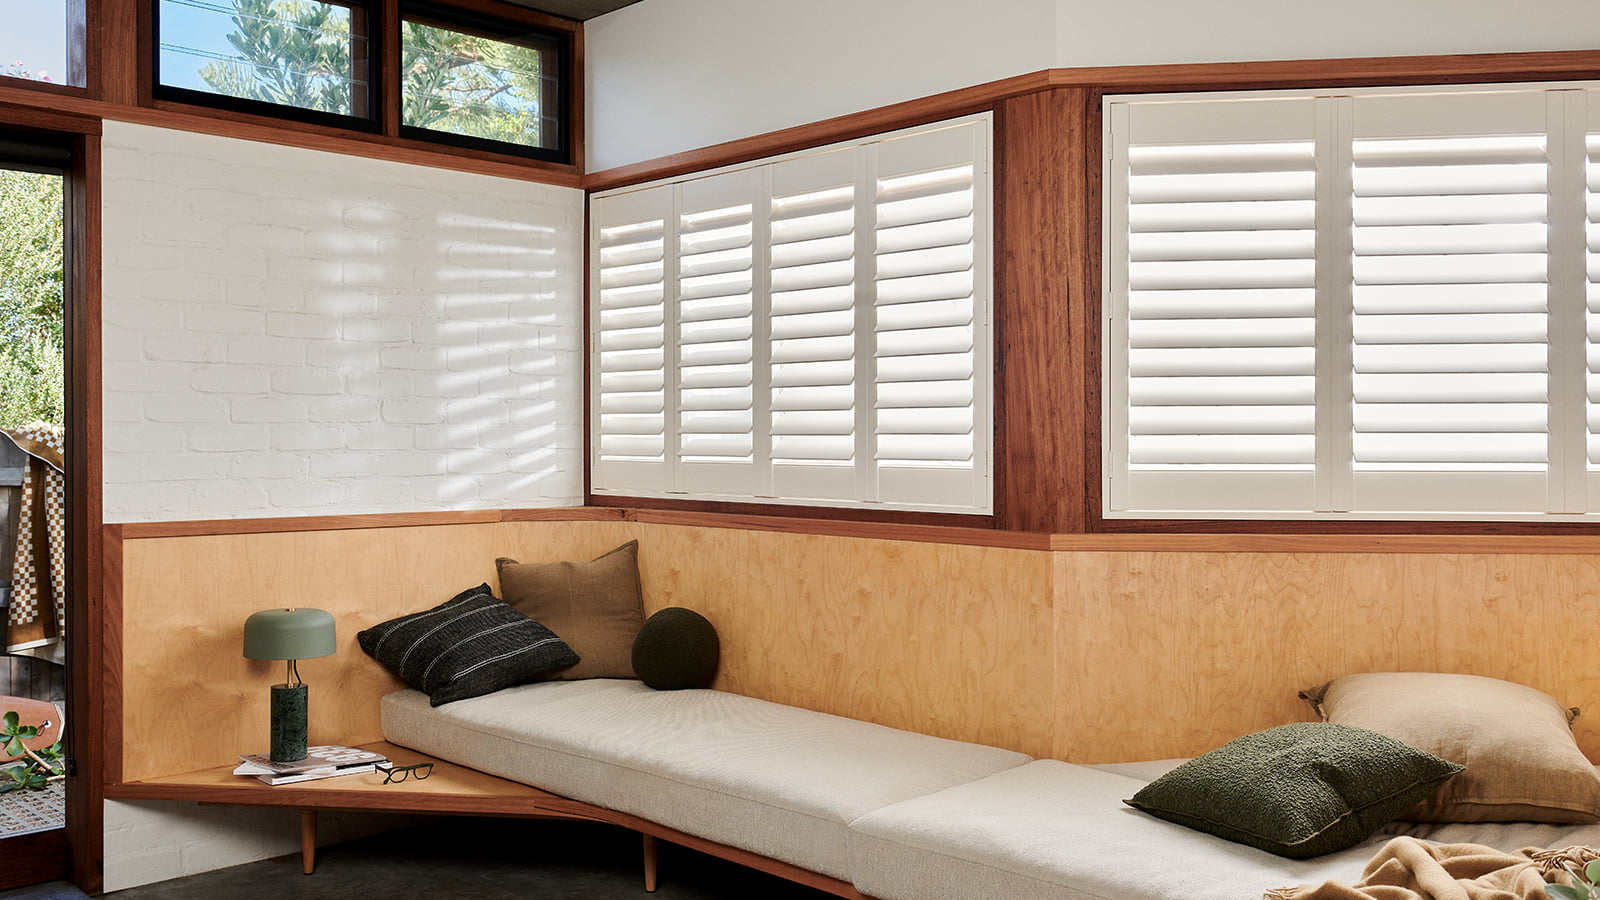 6 reasons to choose Australian-made Luxaflex Plantation Shutters for your home